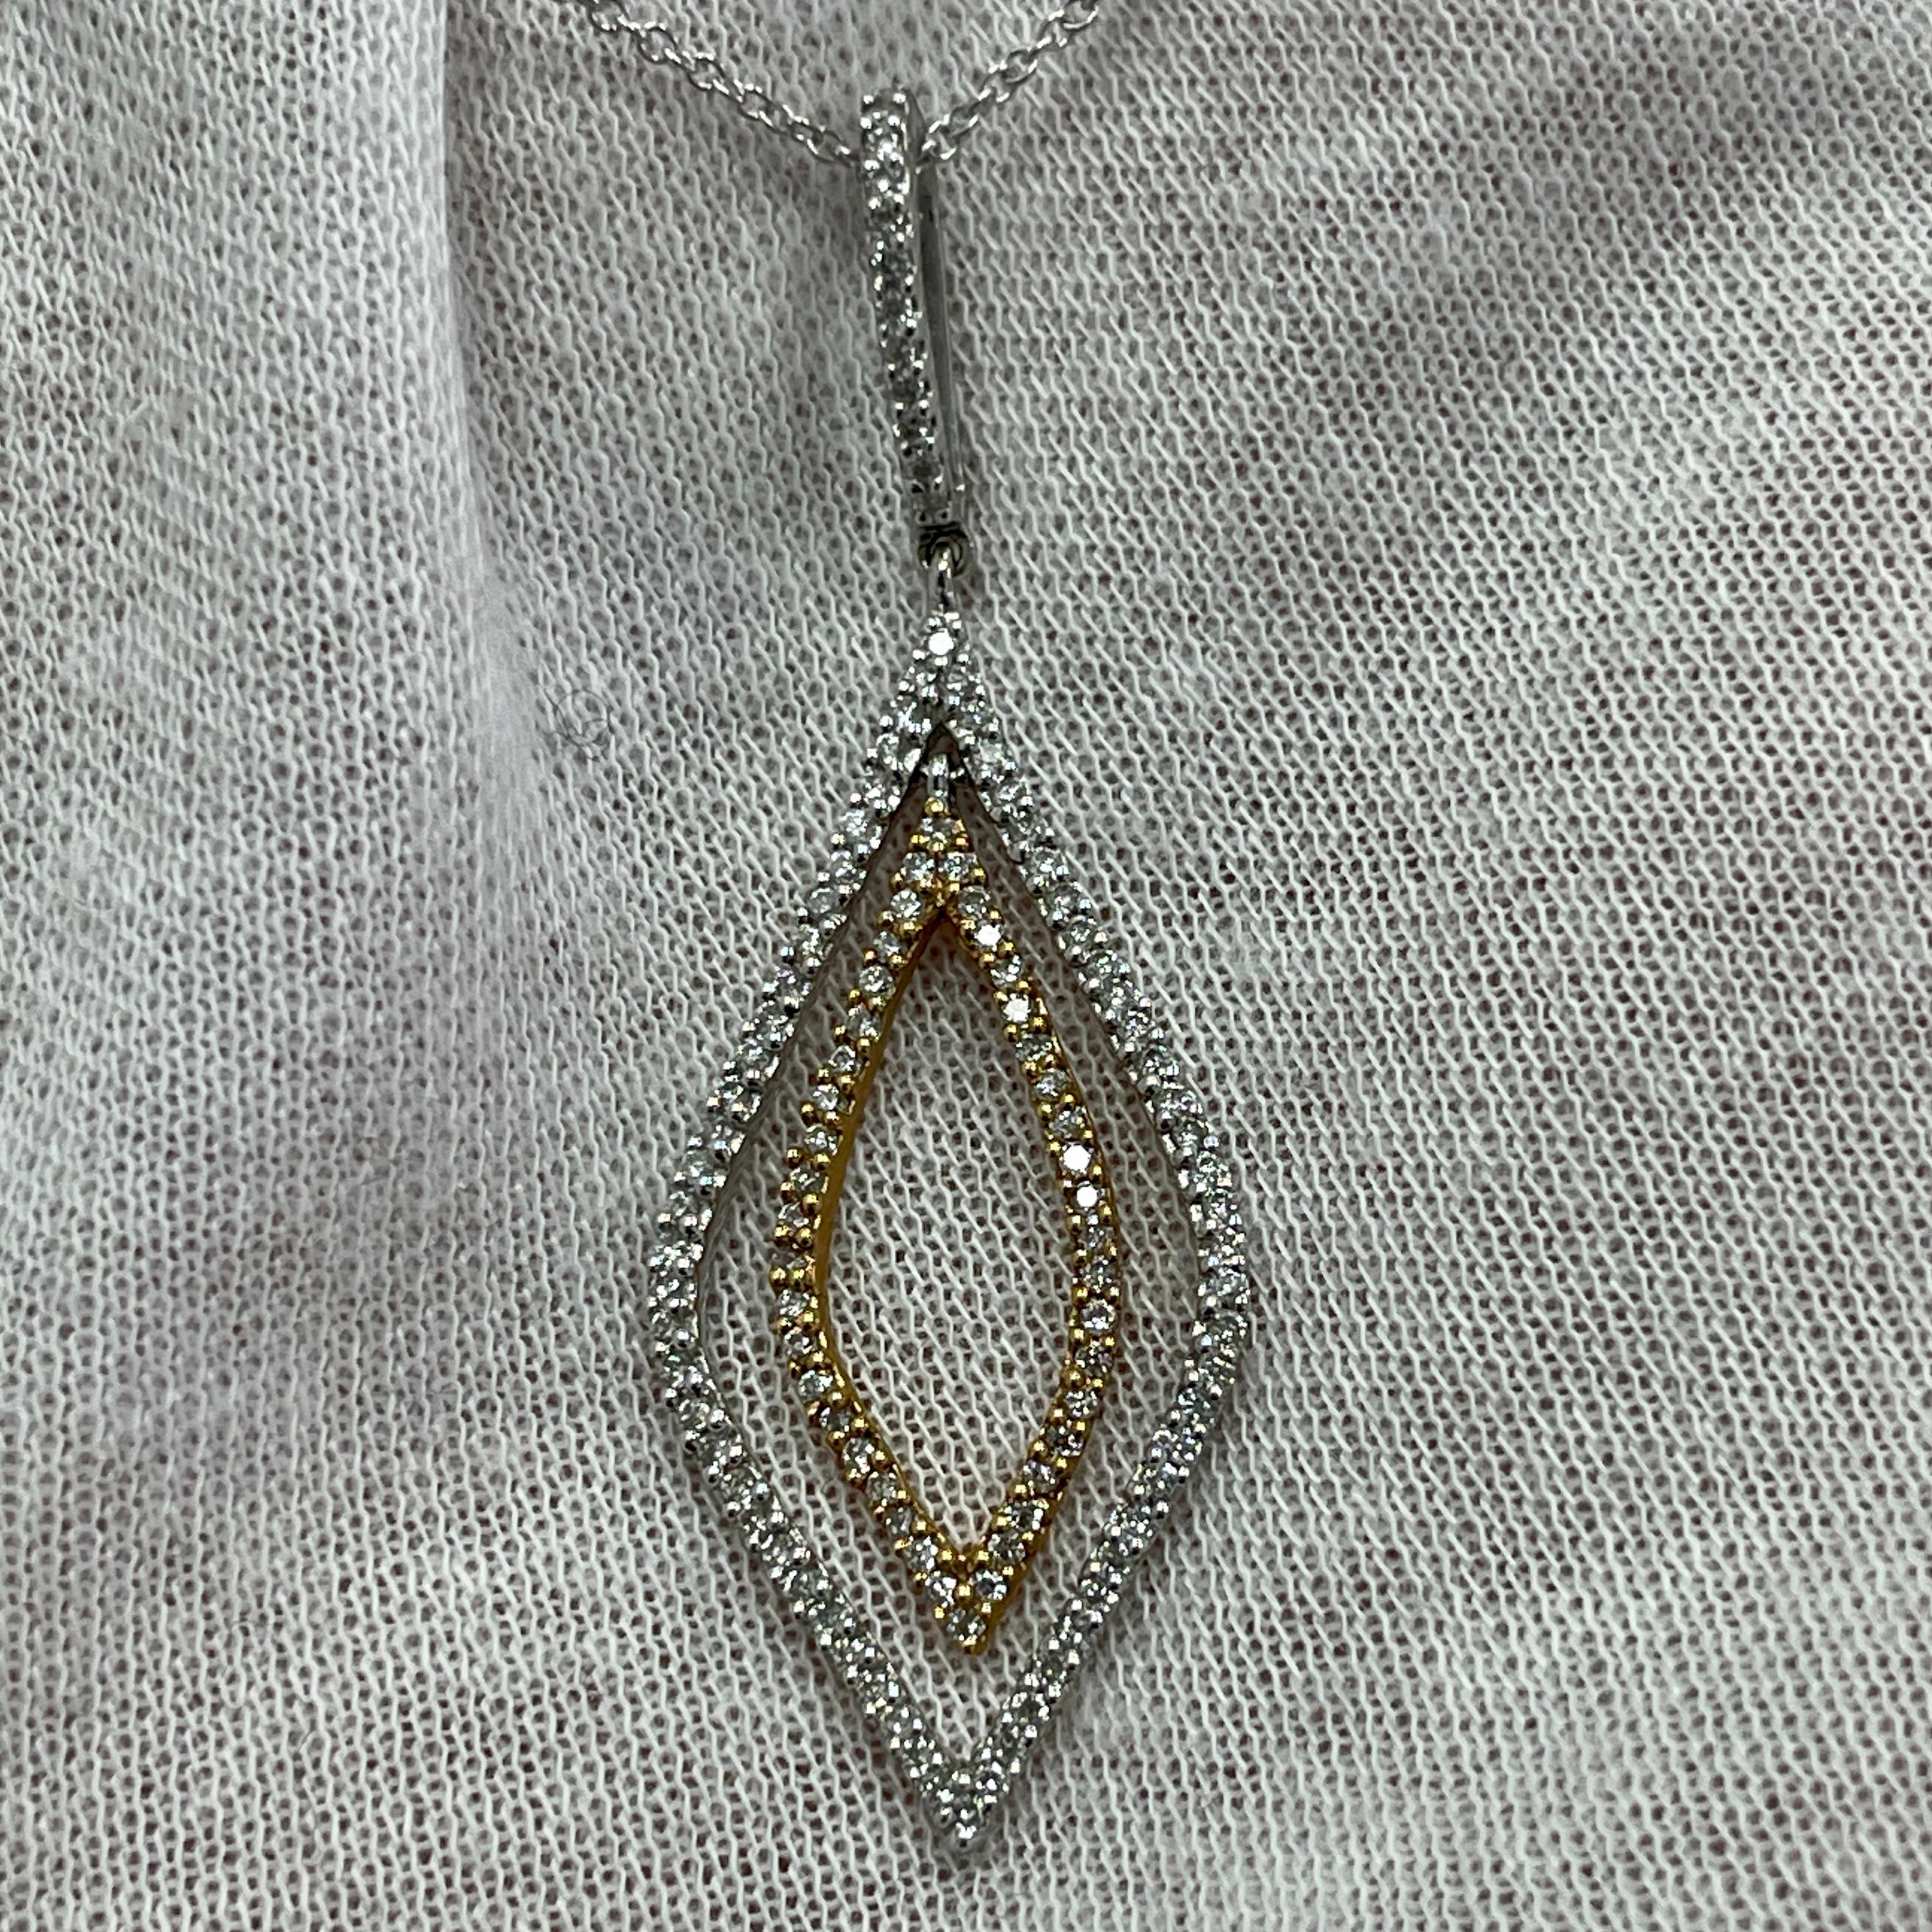 An intricately designed pendant with 0.56Ct of diamonds set in 18K white and yellow gold. 